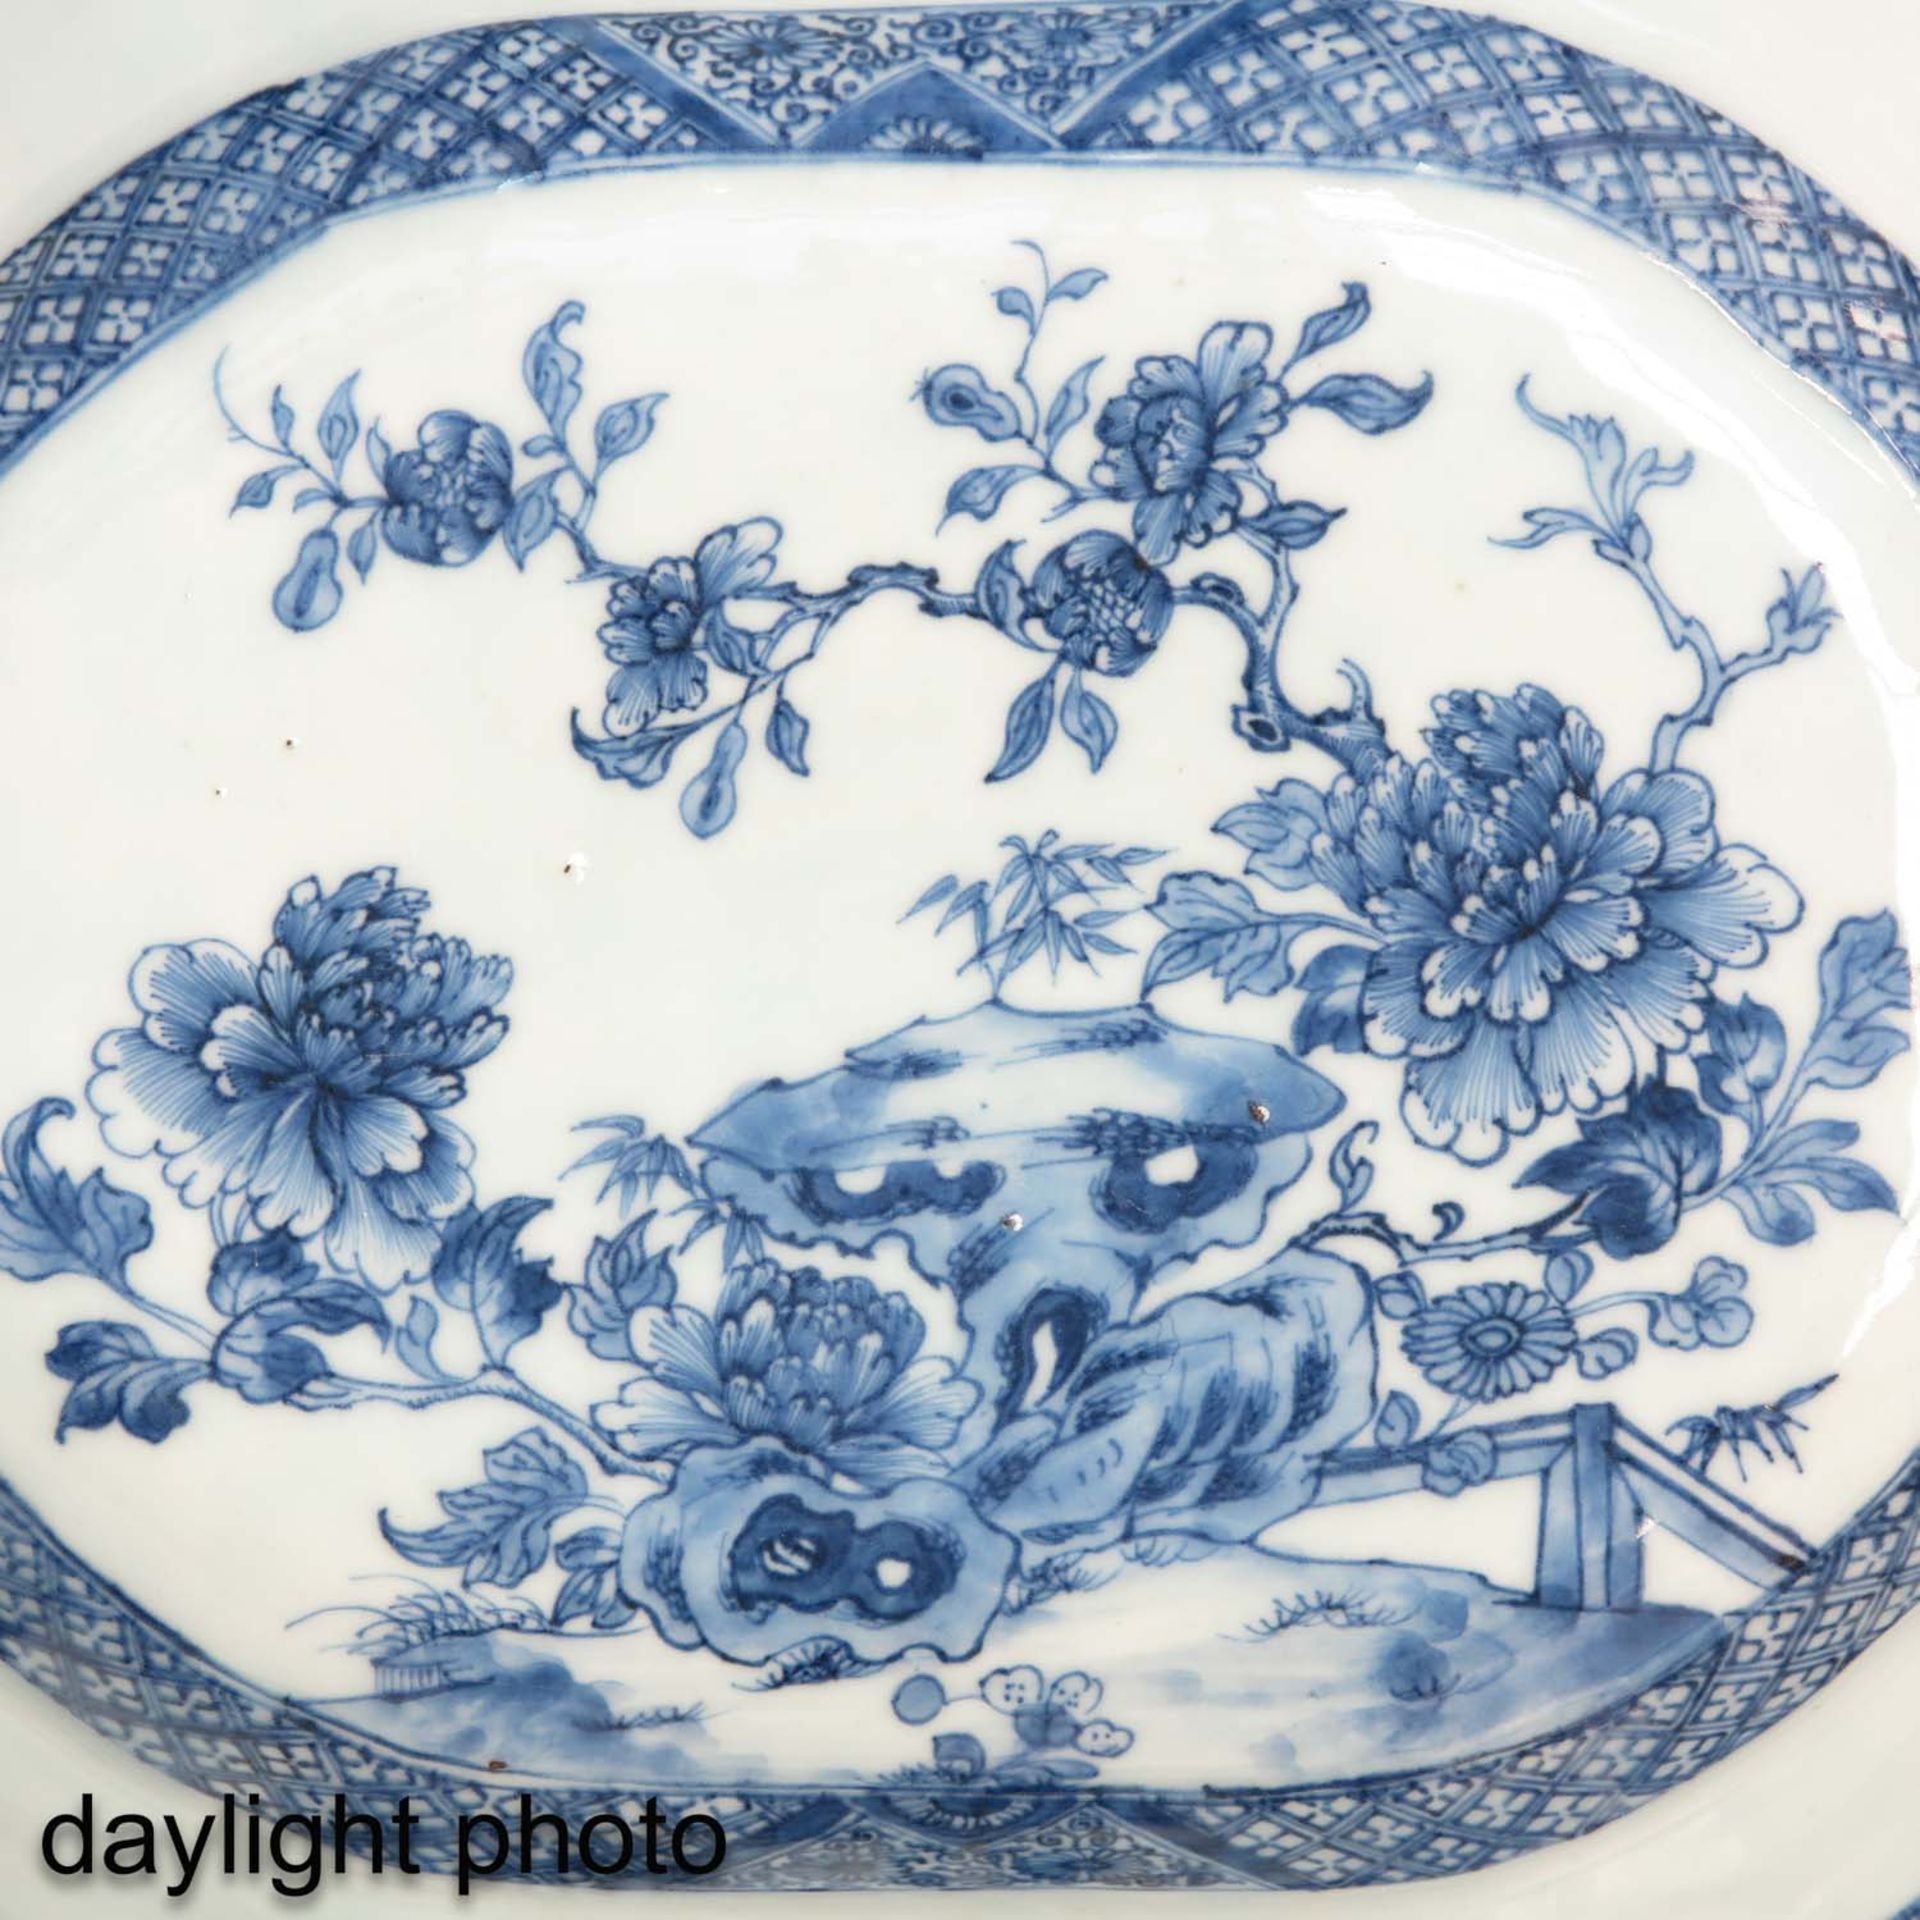 A Blue and White Serving Bowl - Image 9 of 9